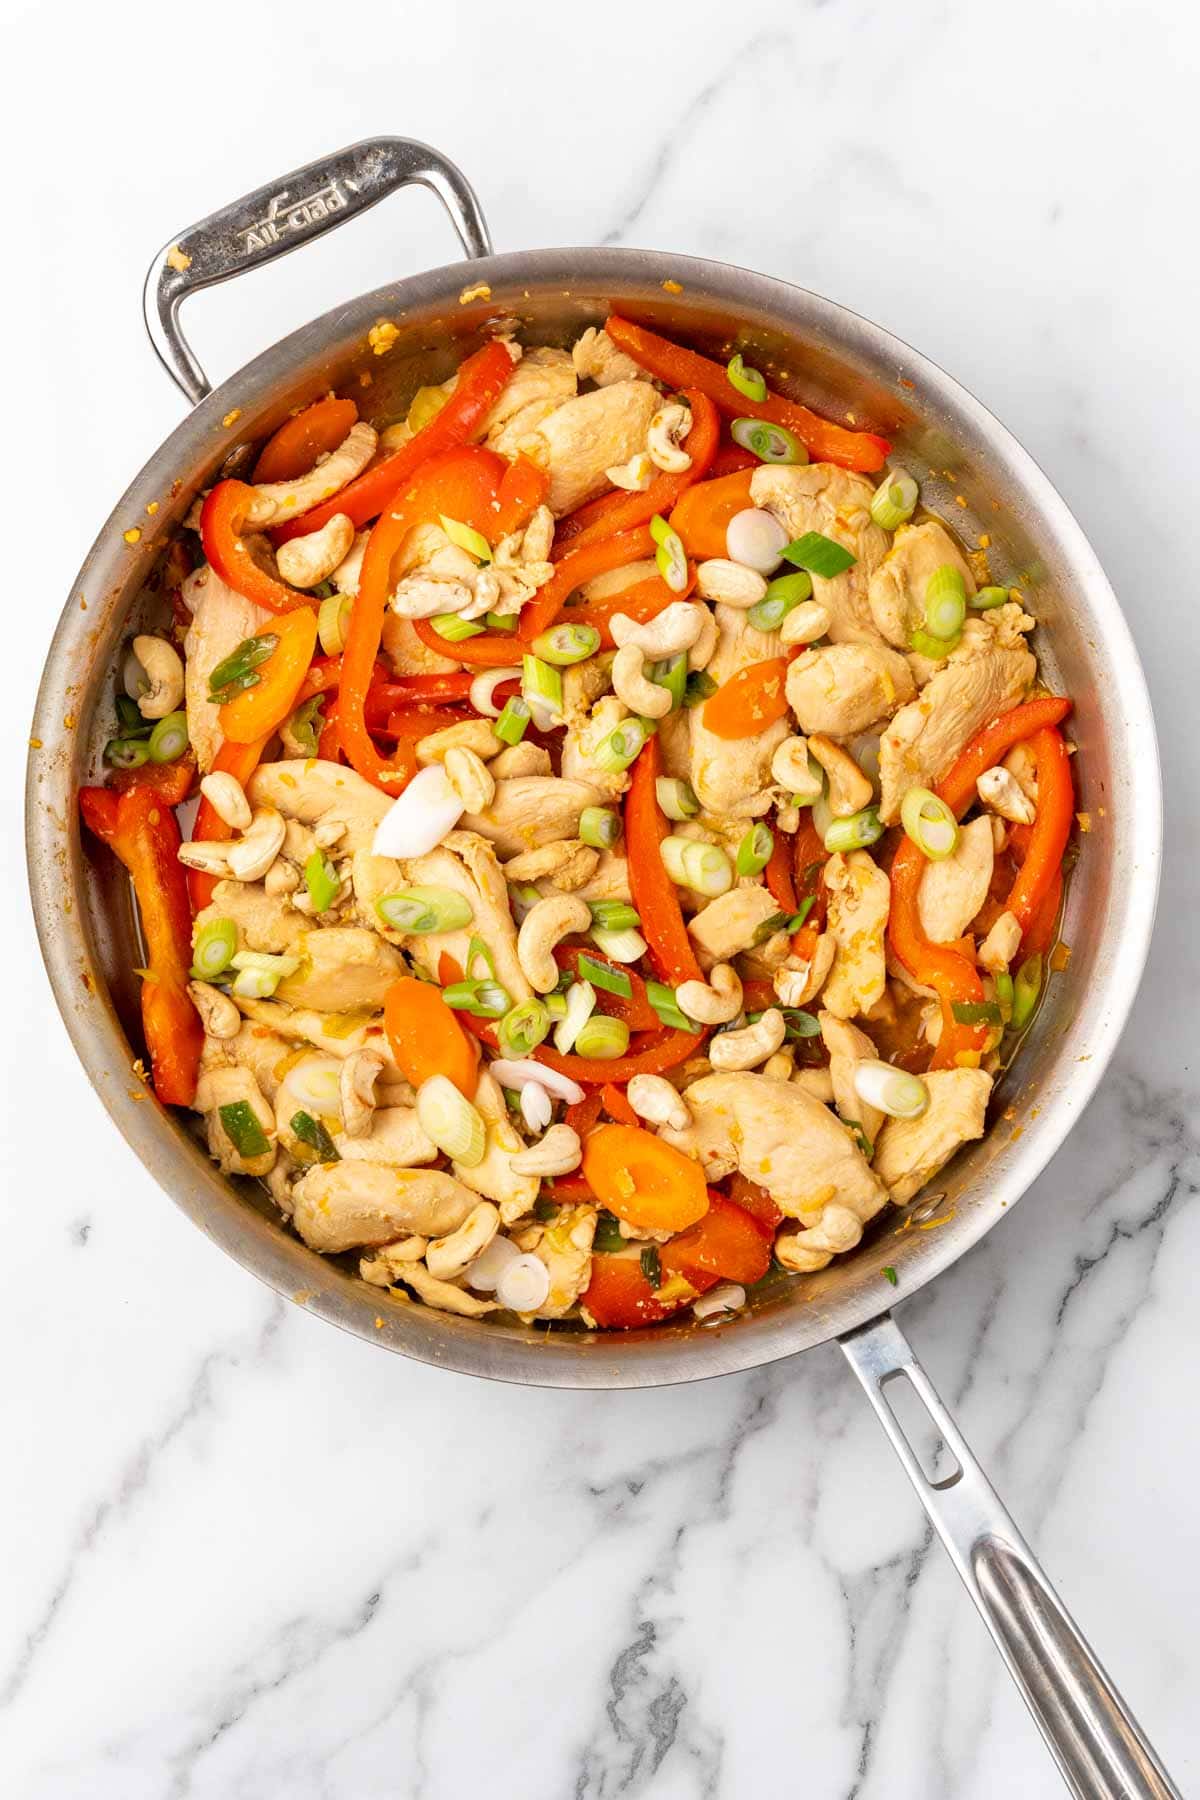 Finished chicken cashew stir-fry in a pan